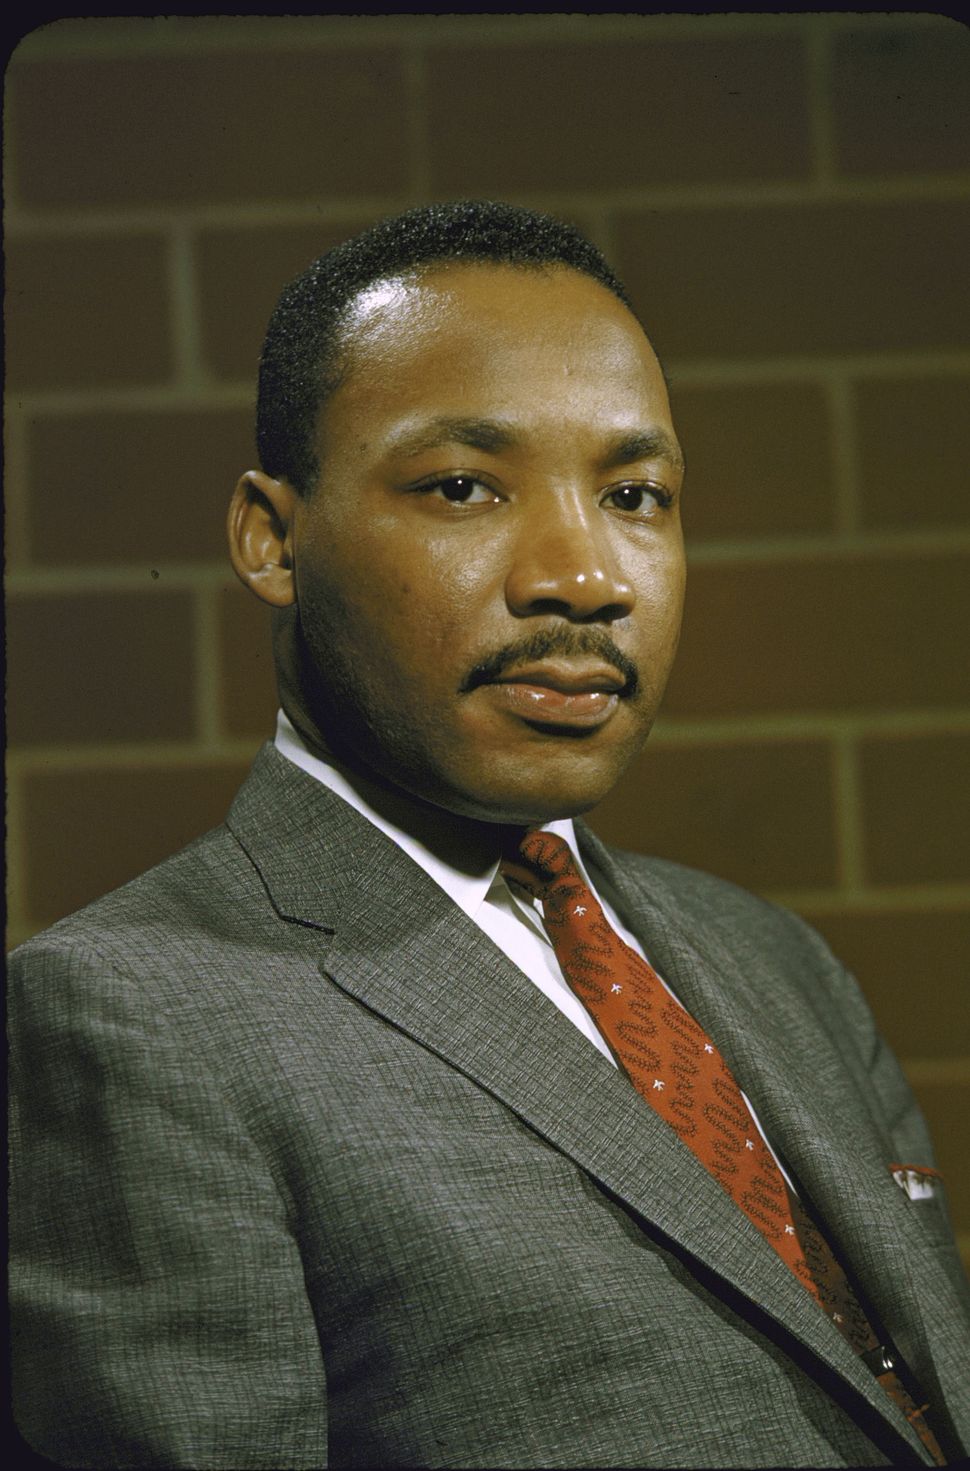 a biography on martin luther king